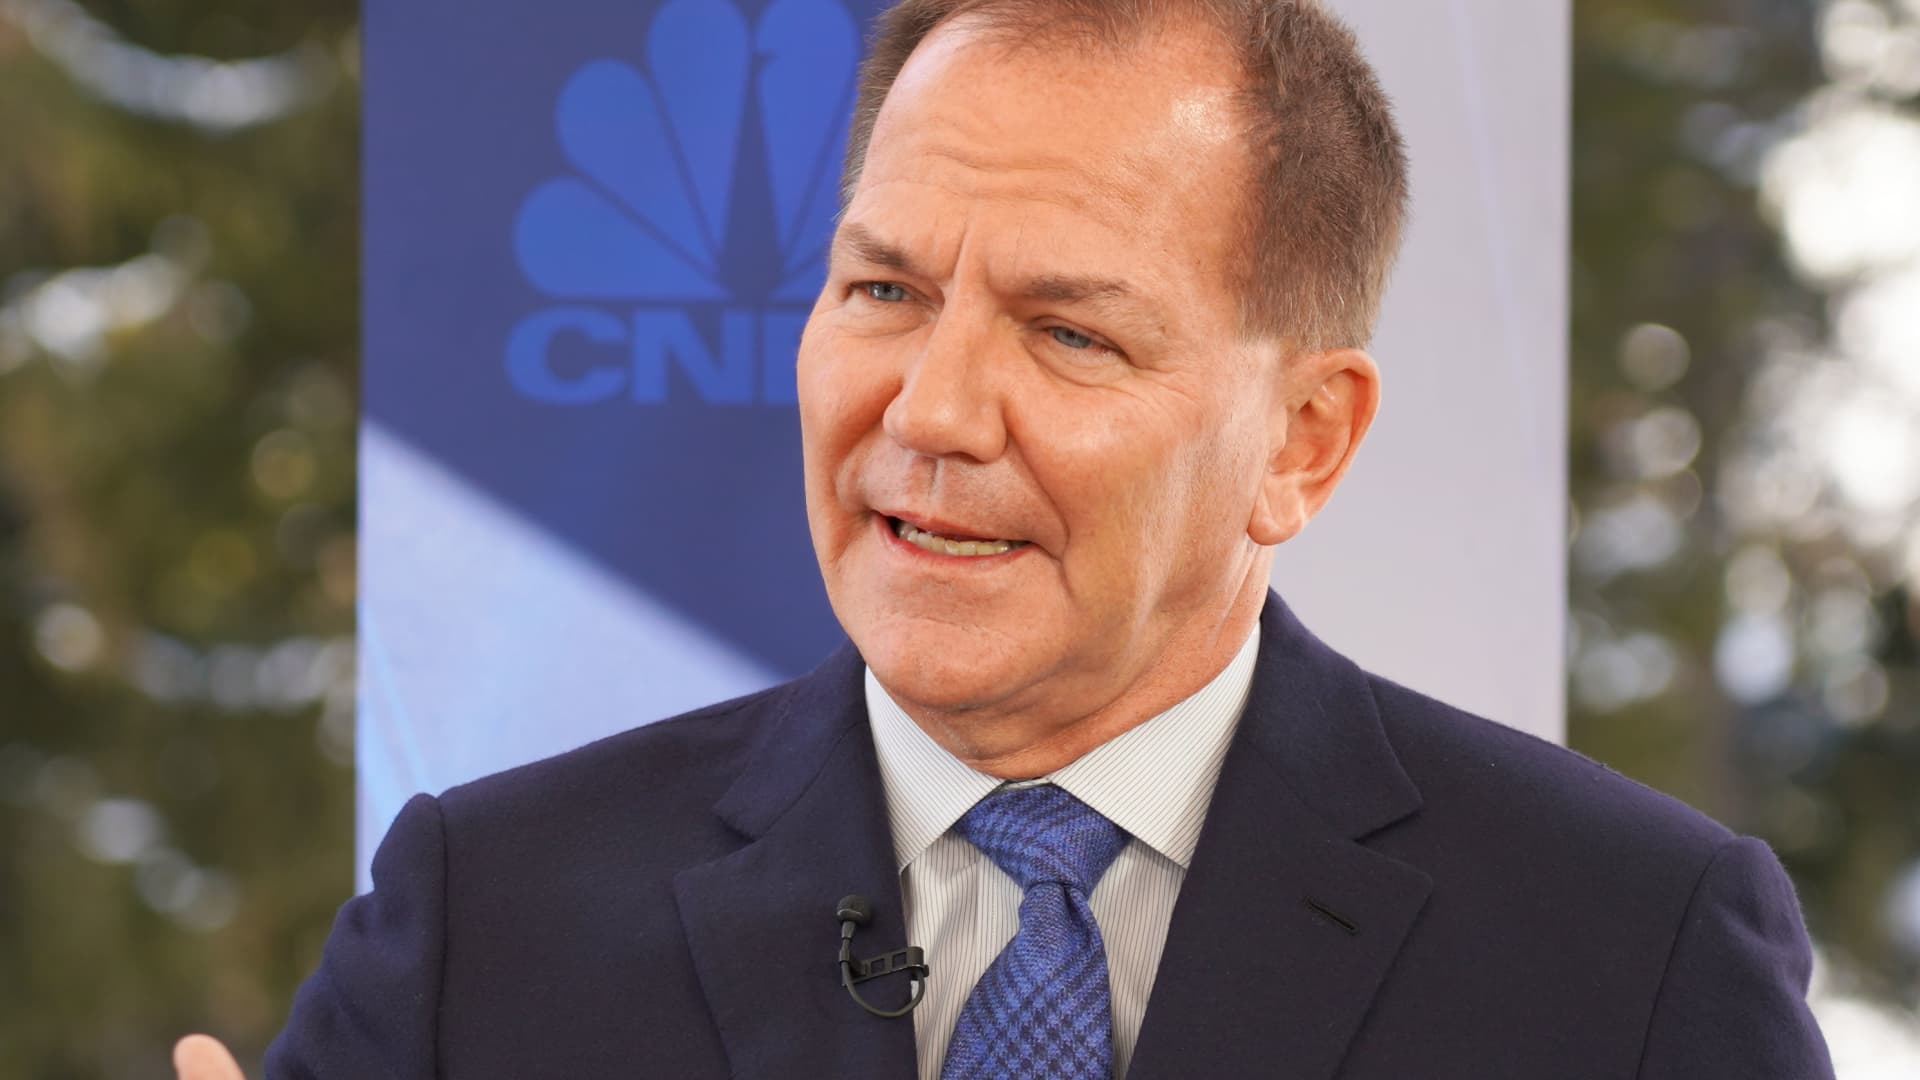 Paul Tudor Jones believes we are in or near a recession and history shows stocks have more to fall